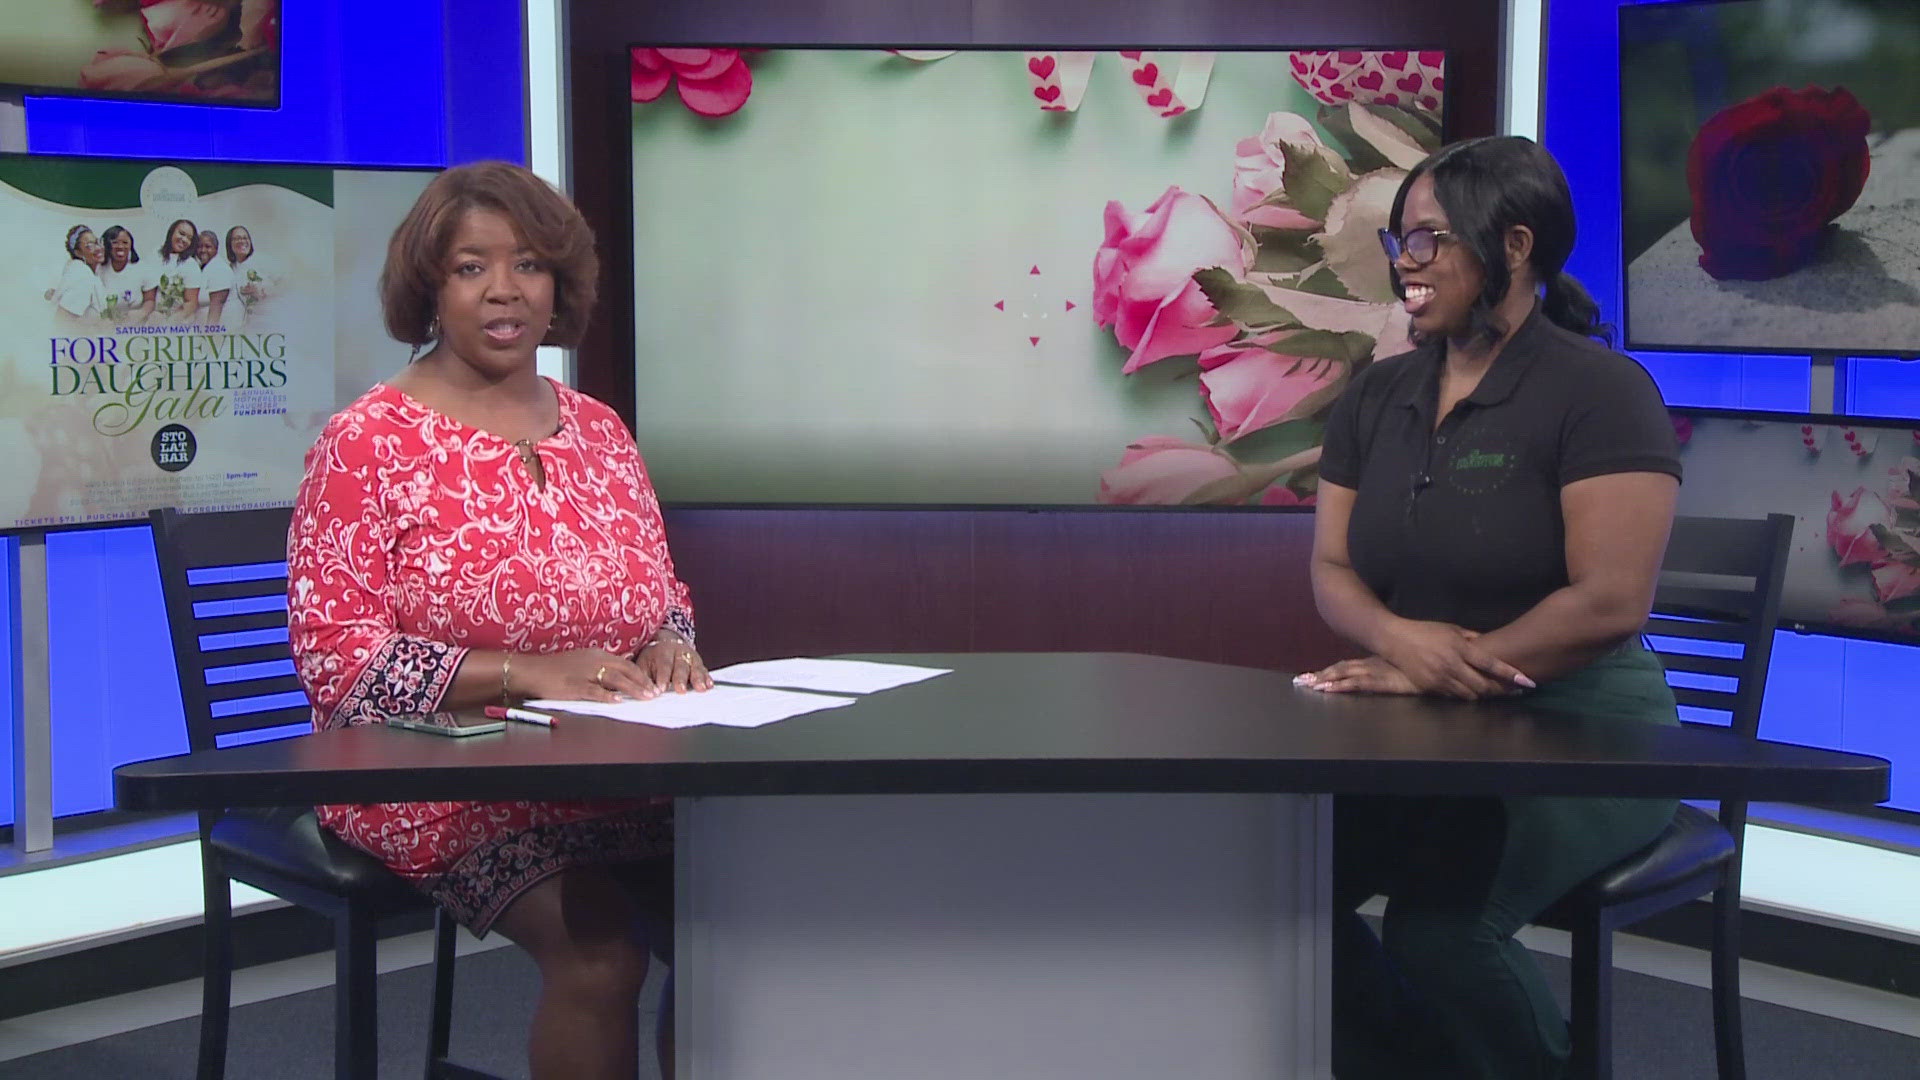 Shai Arnold, the founder of For Grieving Daughters Inc., talked with Claudine Ewing about the annual fundraiser, planned for this weekend.